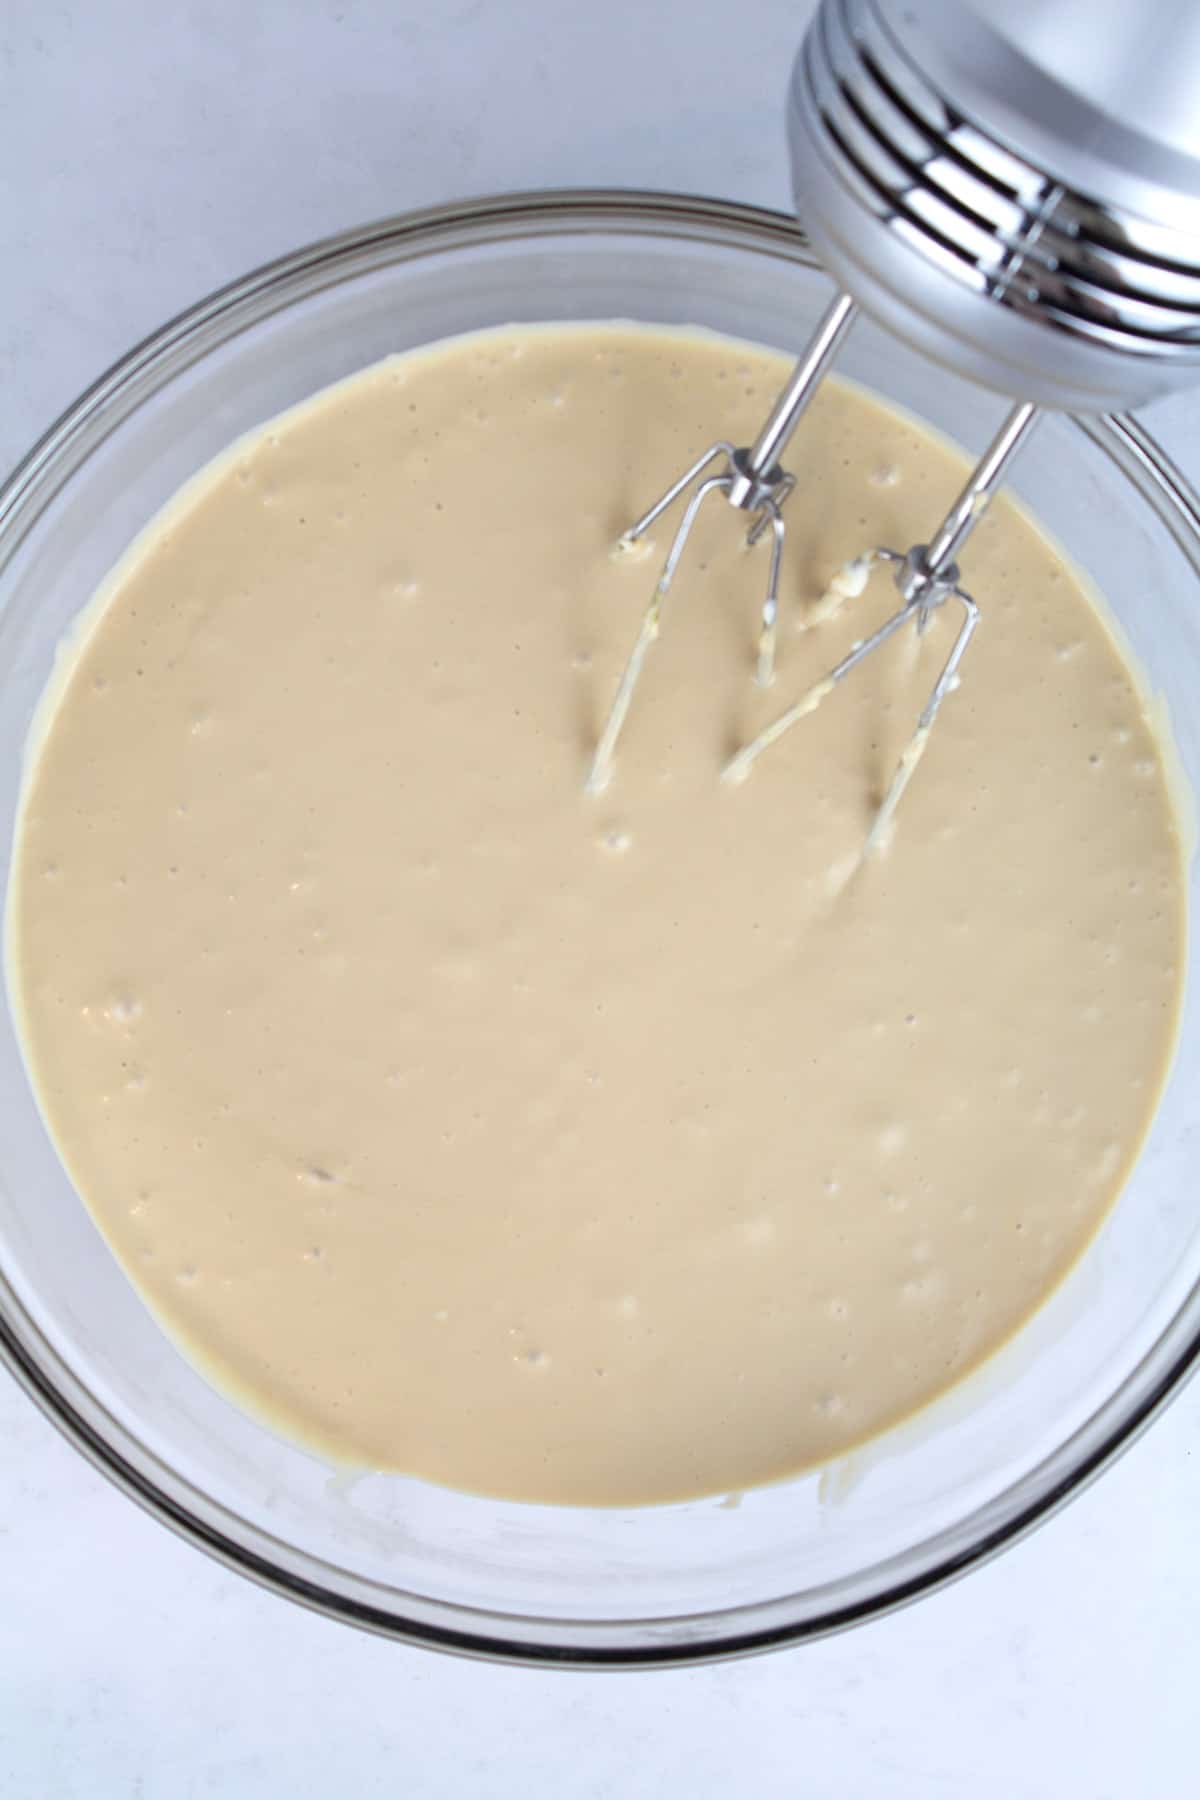 An overhead view of cheesecake batter in a clear glass bowl with a hand mixer resting in the bowl.